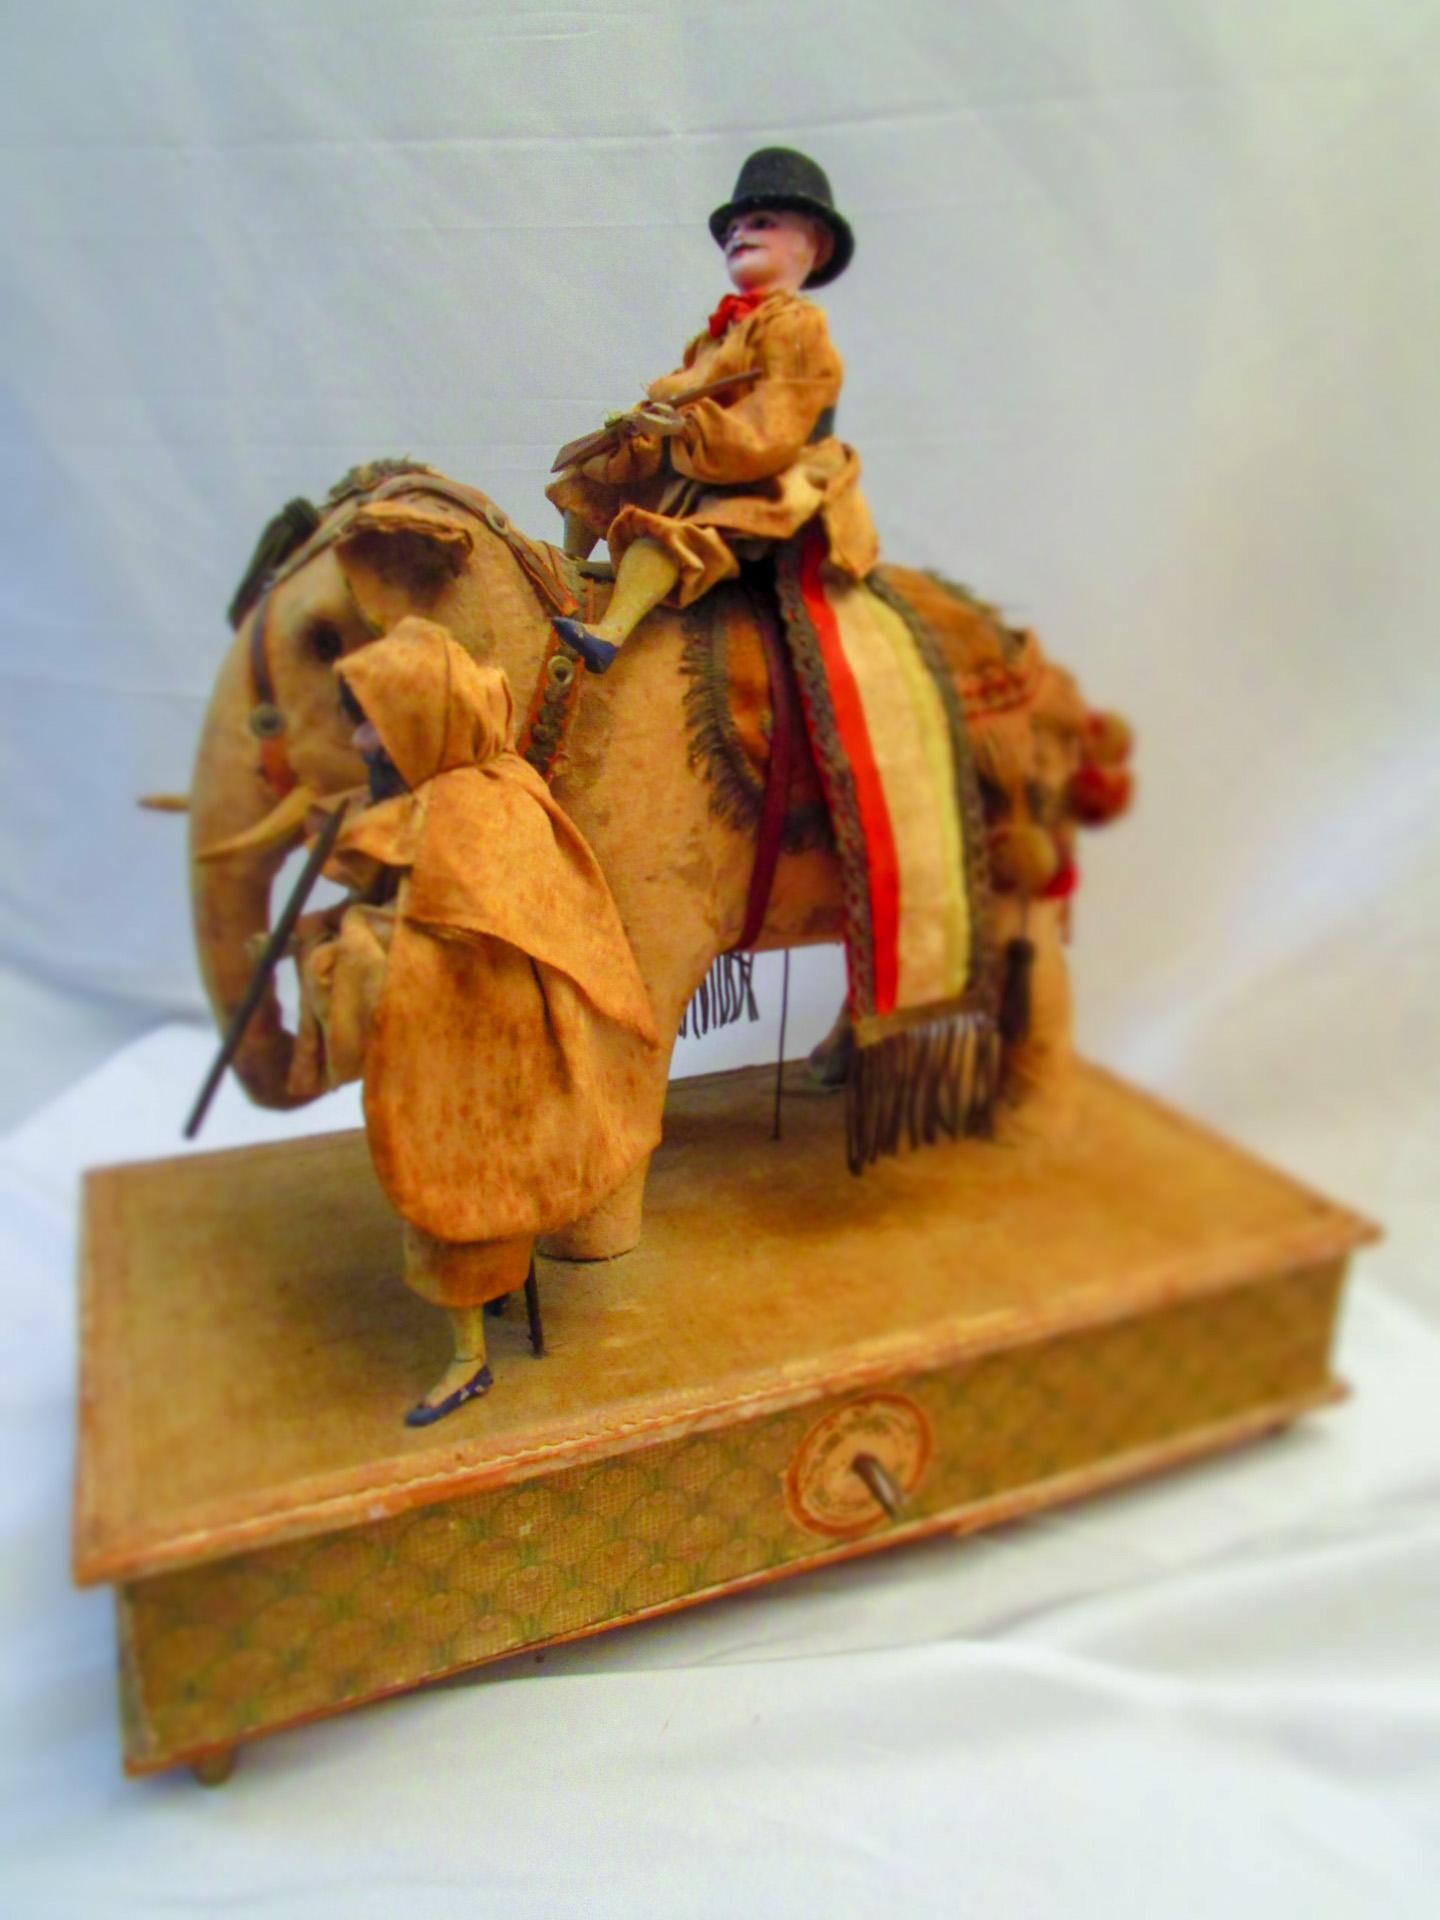 The German manufacturer Gottlieb Zinner & Sohn produced sensational mechanical dolls and toys from 1845-1926. They worked in mostly bisque and wood and were a world leader in making mechanical and musical dolls. This rare extravagant presentation